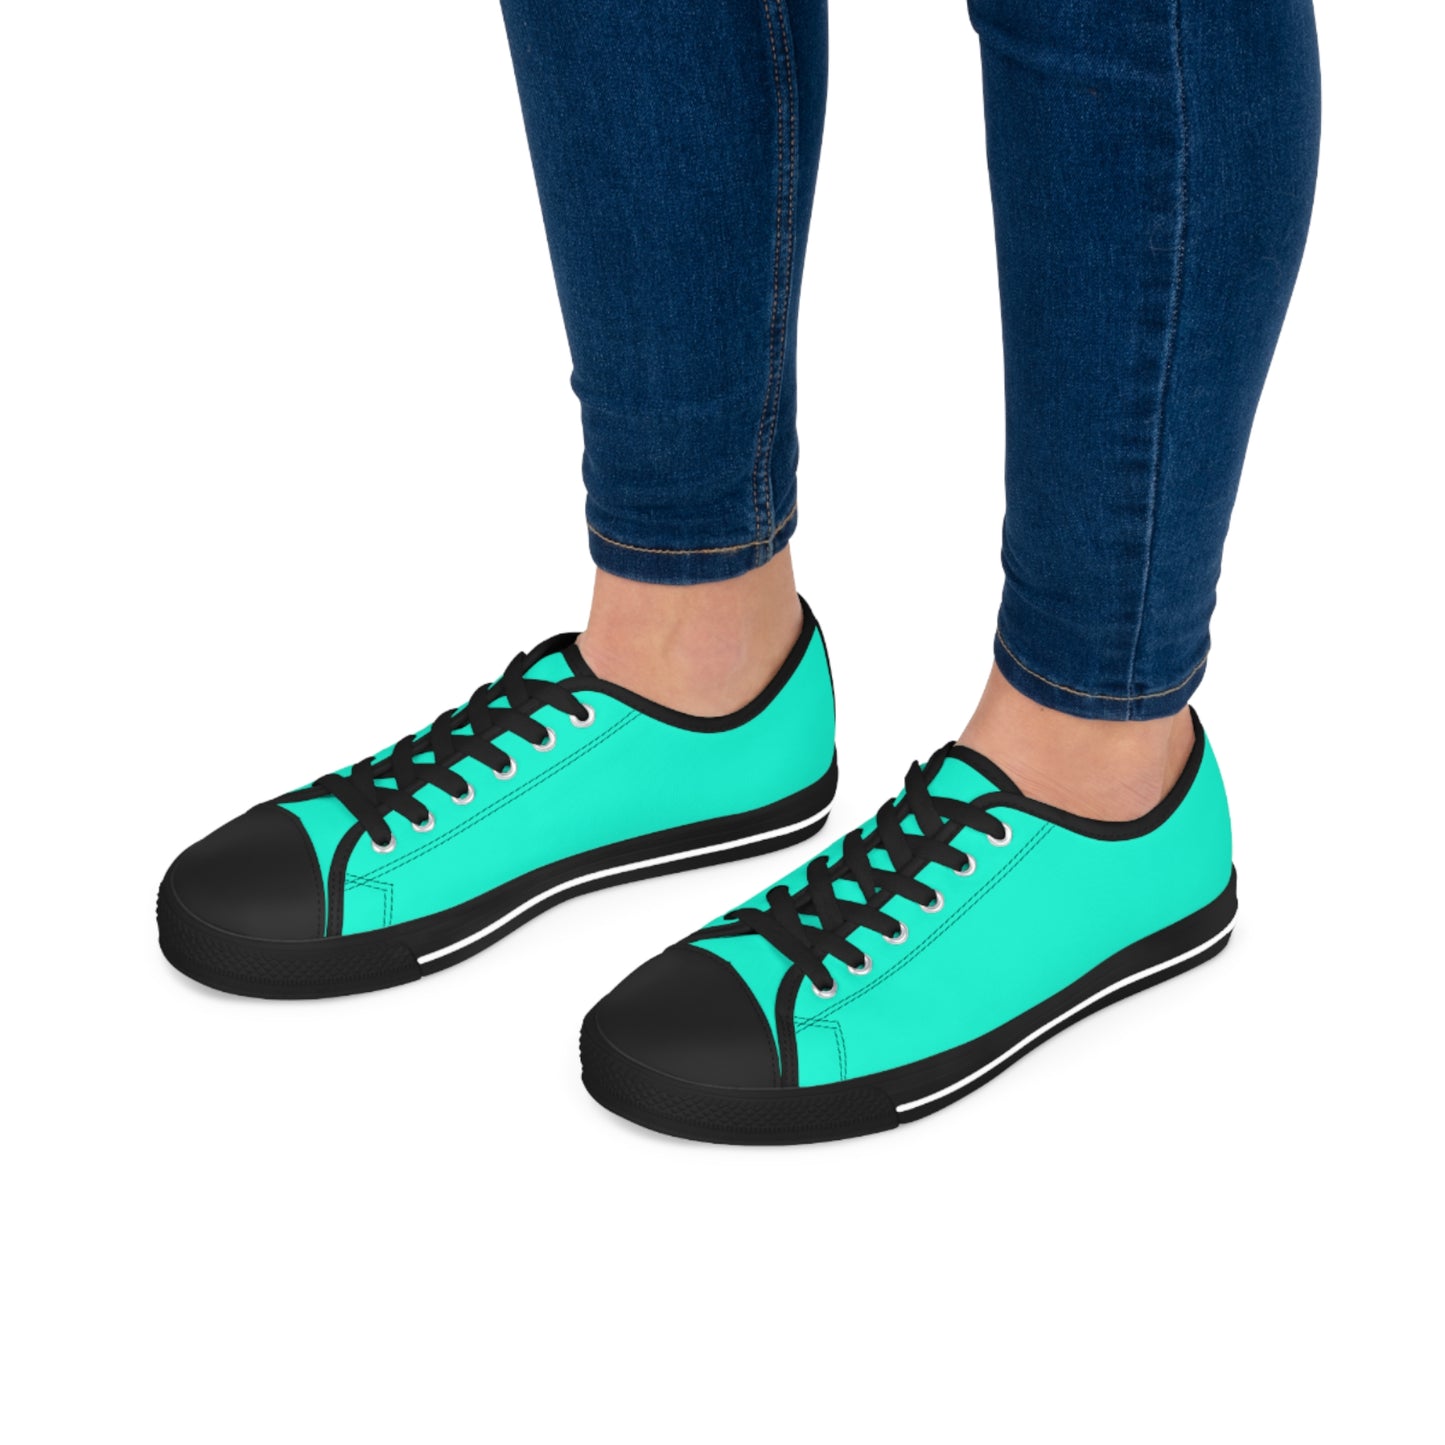 Women's Canvas Low Top Solid Color Sneakers - Cool Pool Aqua Green US 12 White sole